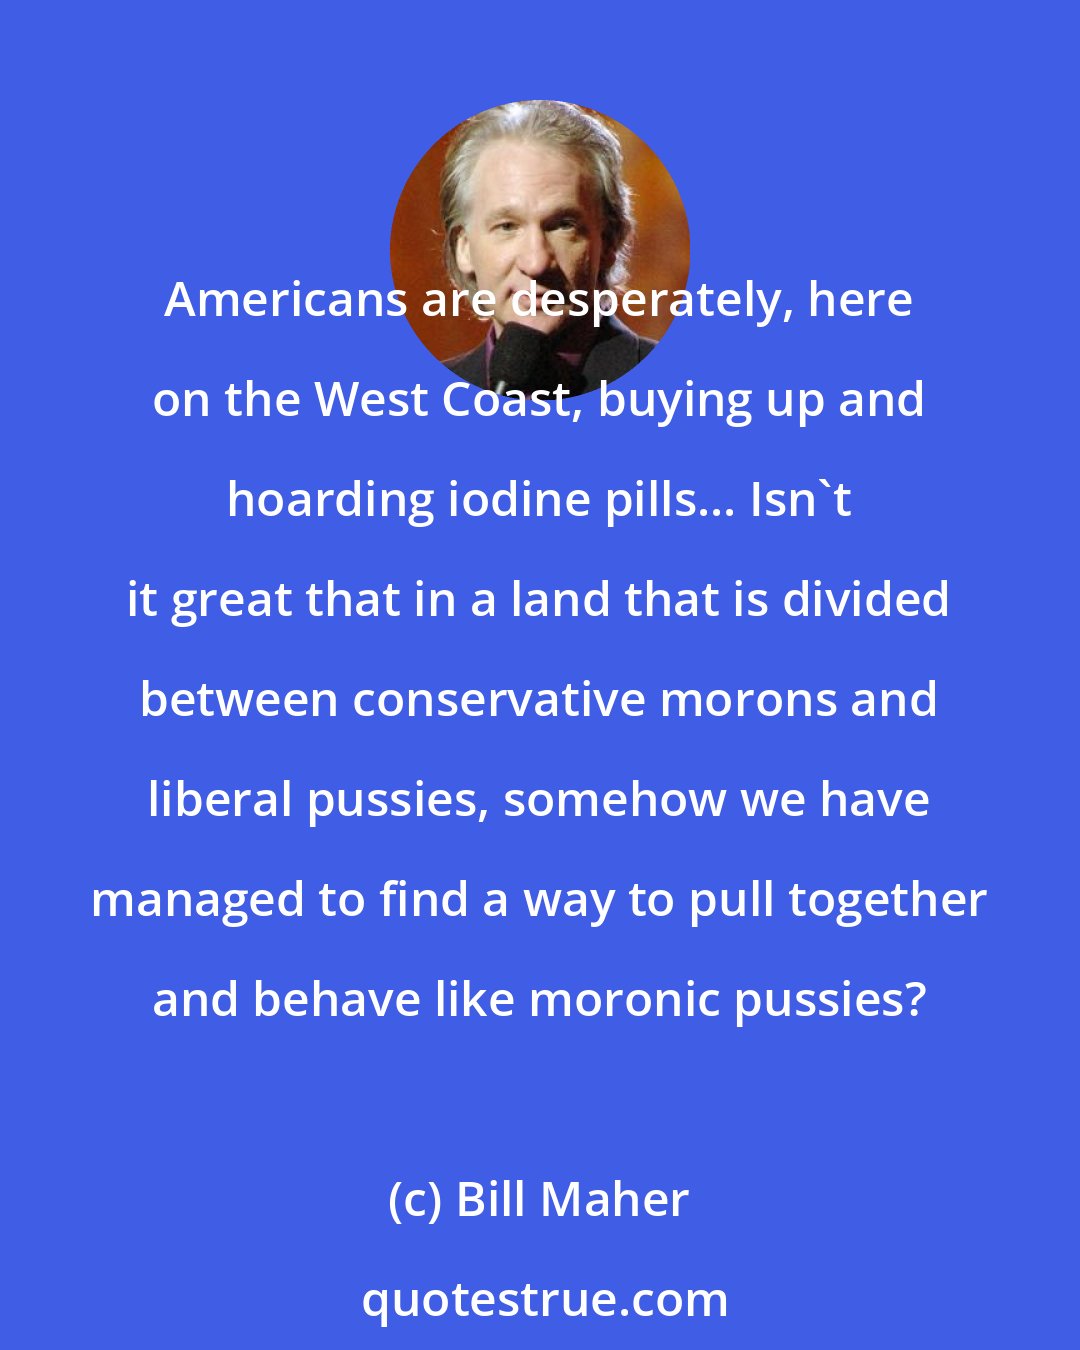 Bill Maher: Americans are desperately, here on the West Coast, buying up and hoarding iodine pills... Isn't it great that in a land that is divided between conservative morons and liberal pussies, somehow we have managed to find a way to pull together and behave like moronic pussies?